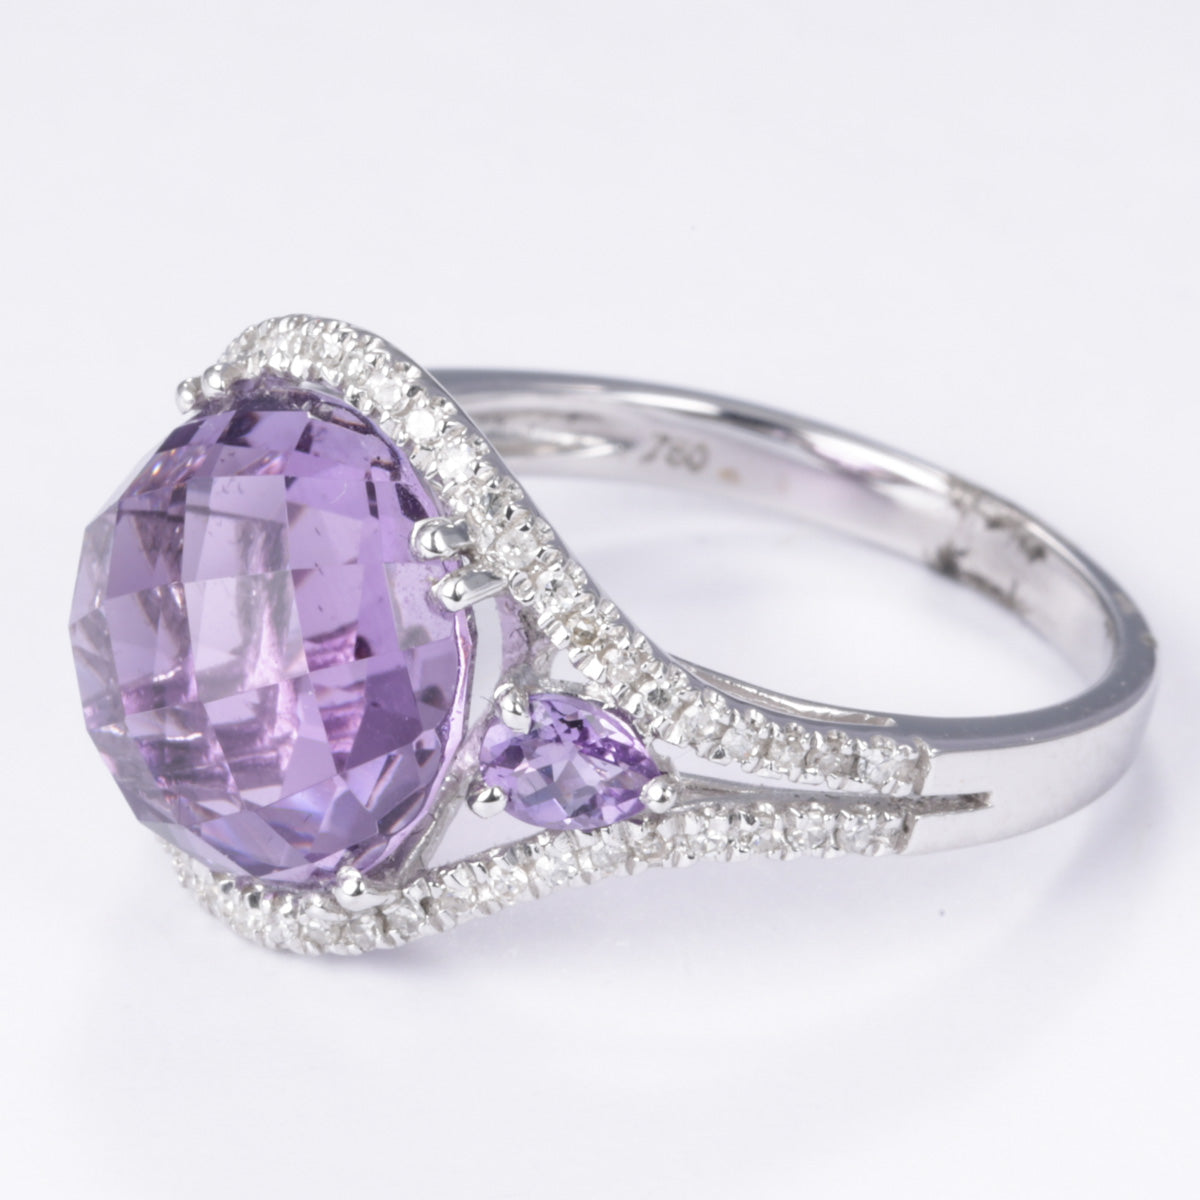 18k White Gold Amethyst and Diamond Ring | 5.83ctw, 0.20ctw | Size 7